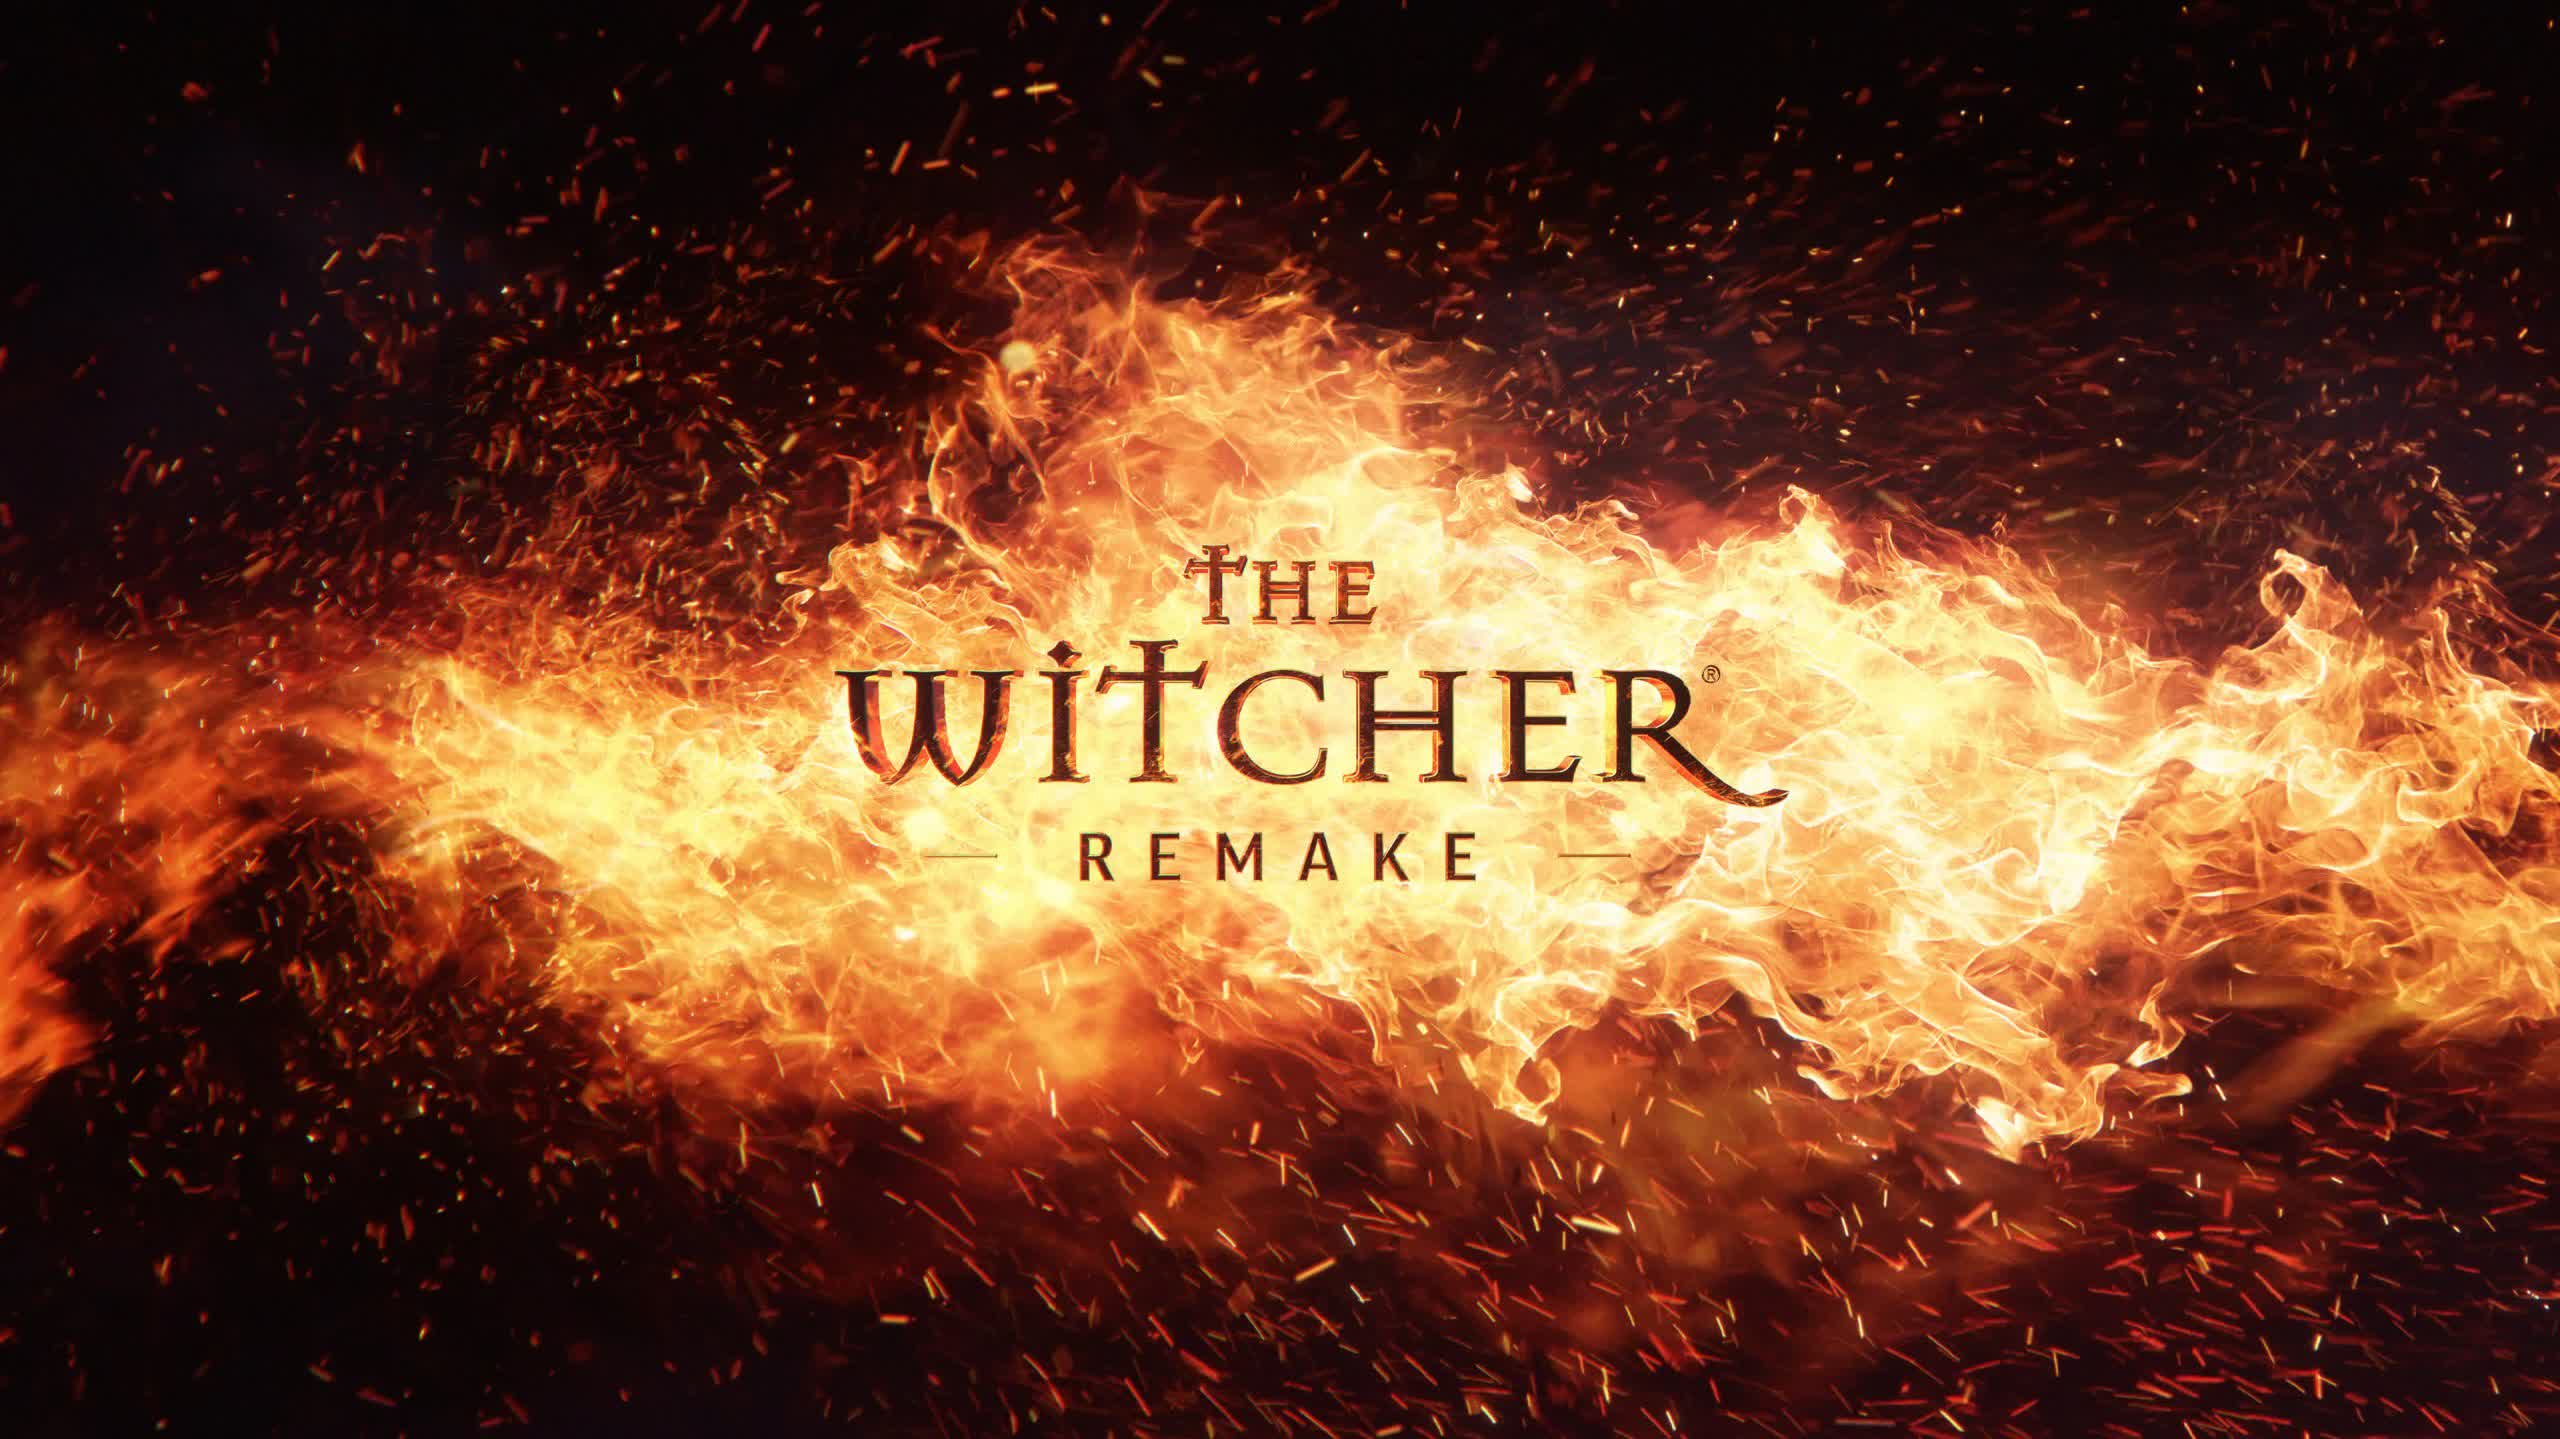 CD Projekt Red is overseeing a remake of the first Witcher game